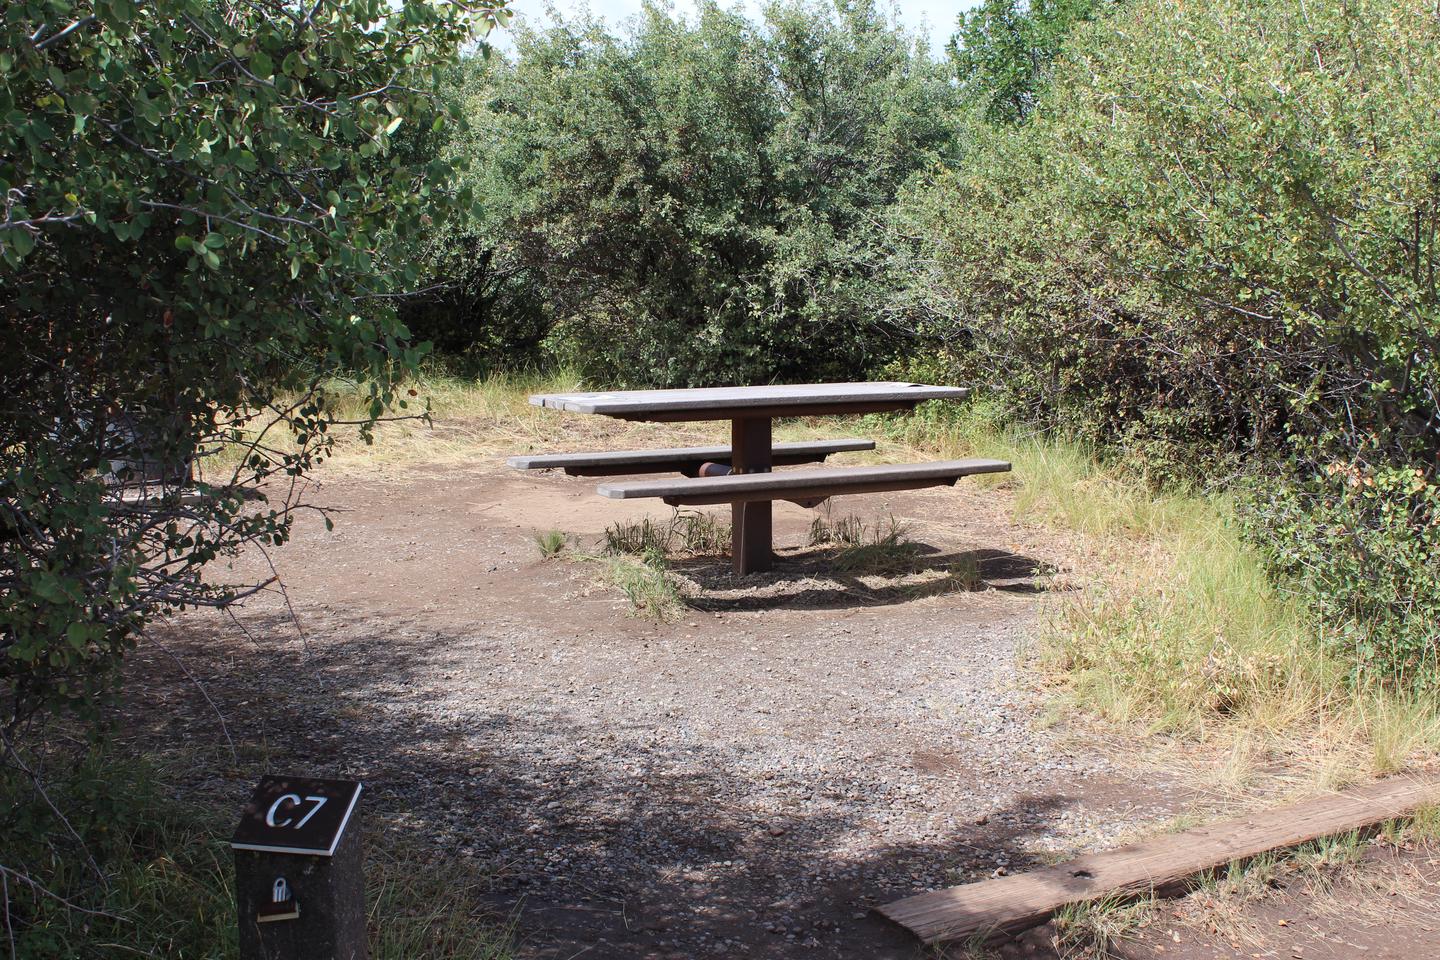 C7 siteCt site and picnic area